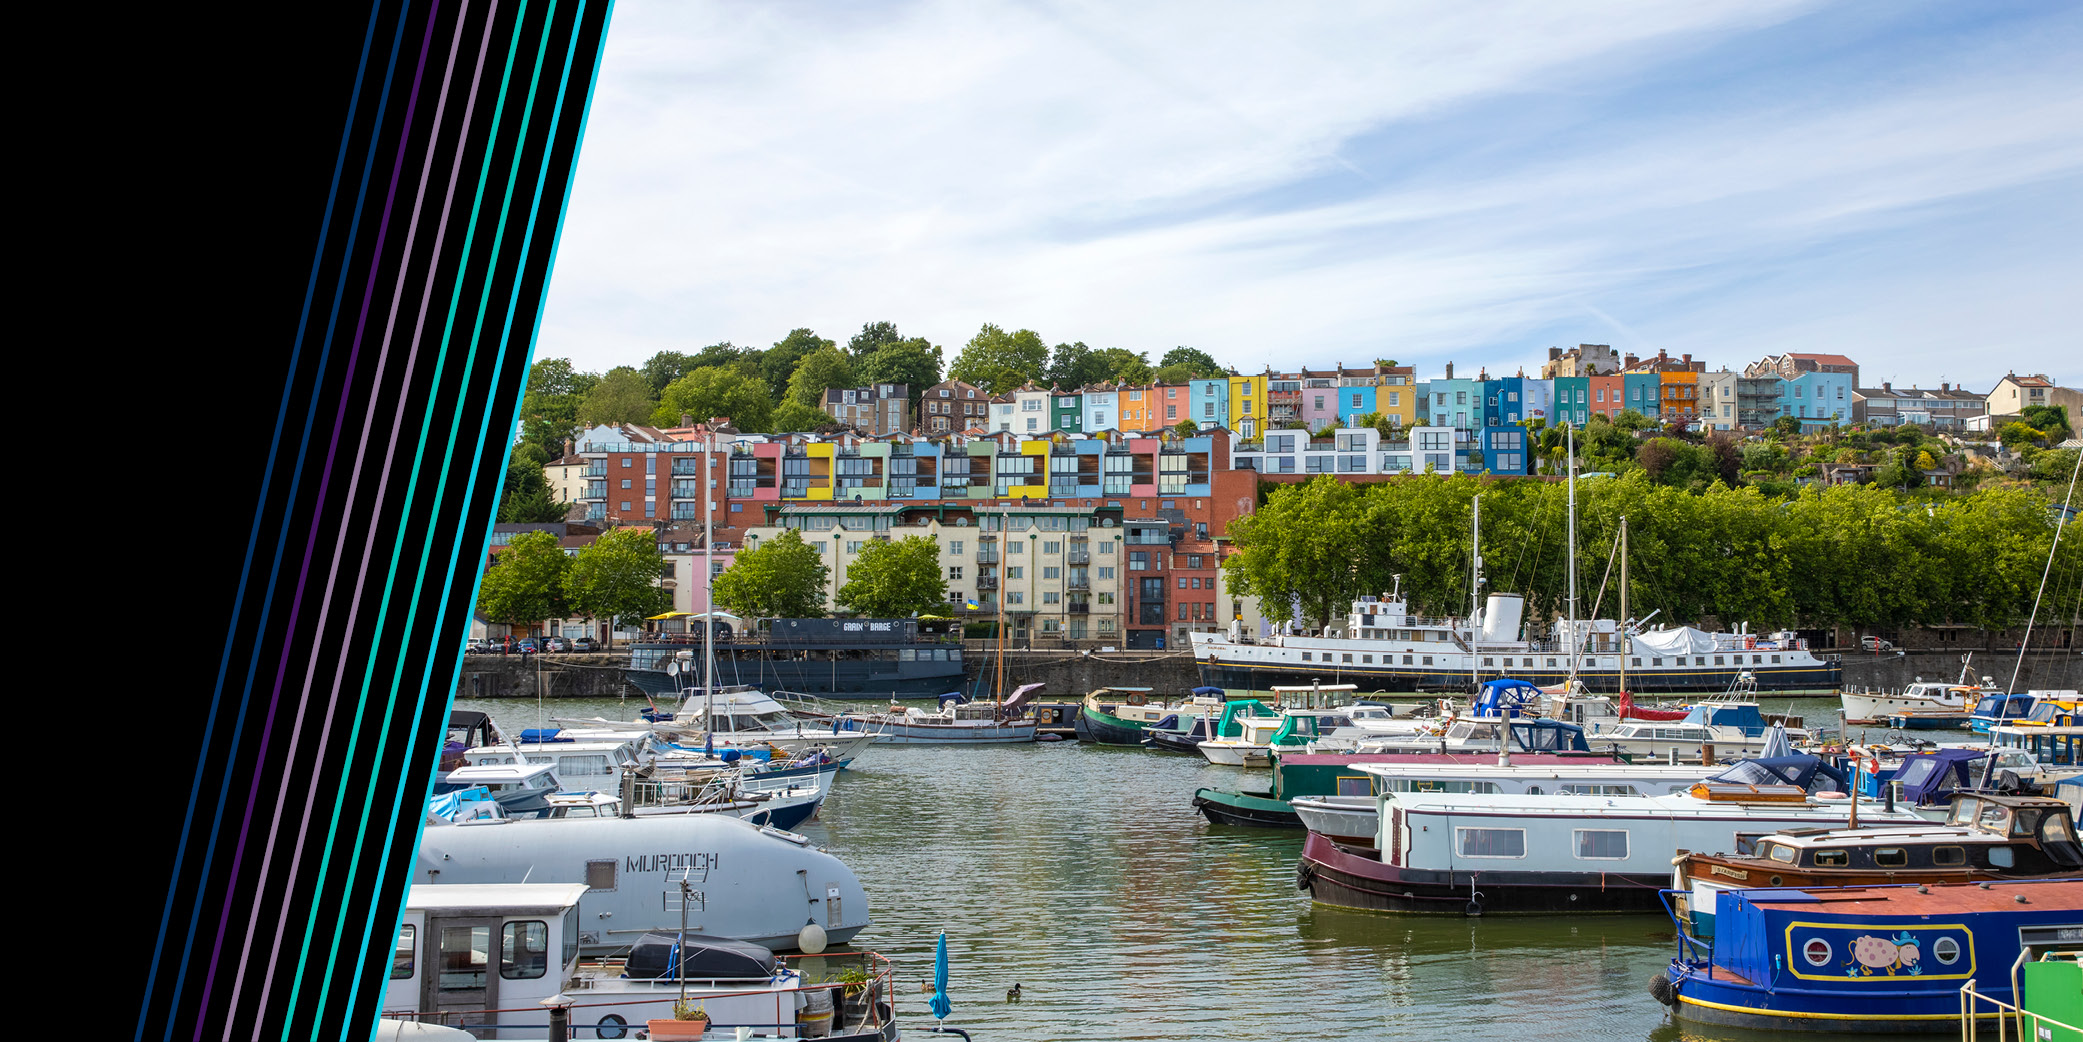 Bristol harbourside with boats and colourful houses